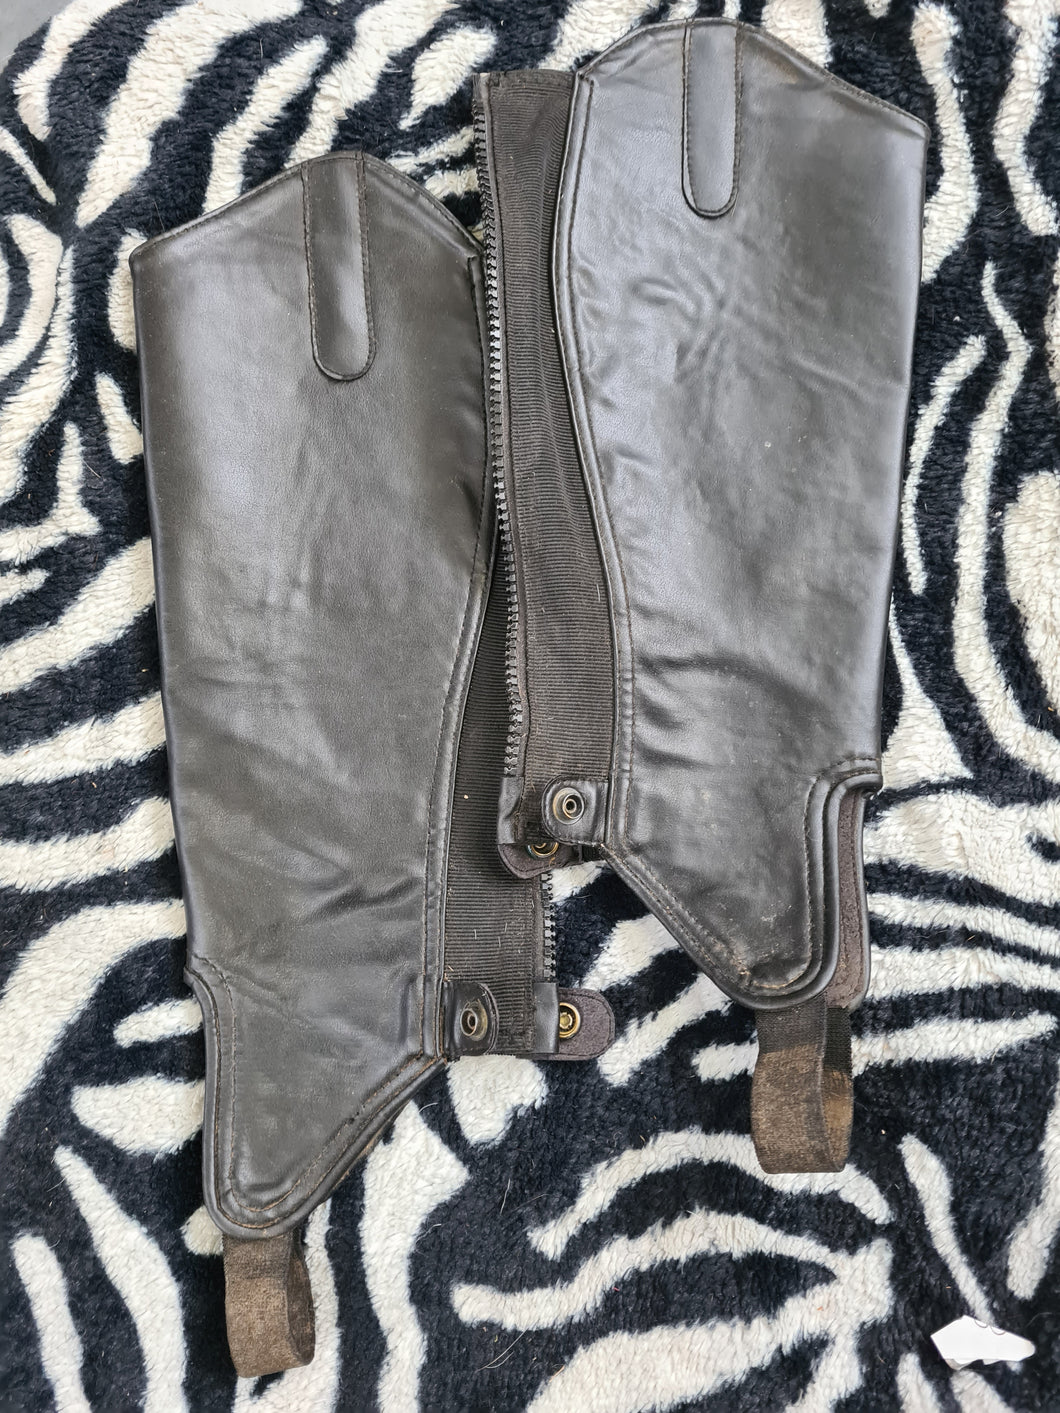 Used shires adults small leather chaps FREE POSTAGE🟢